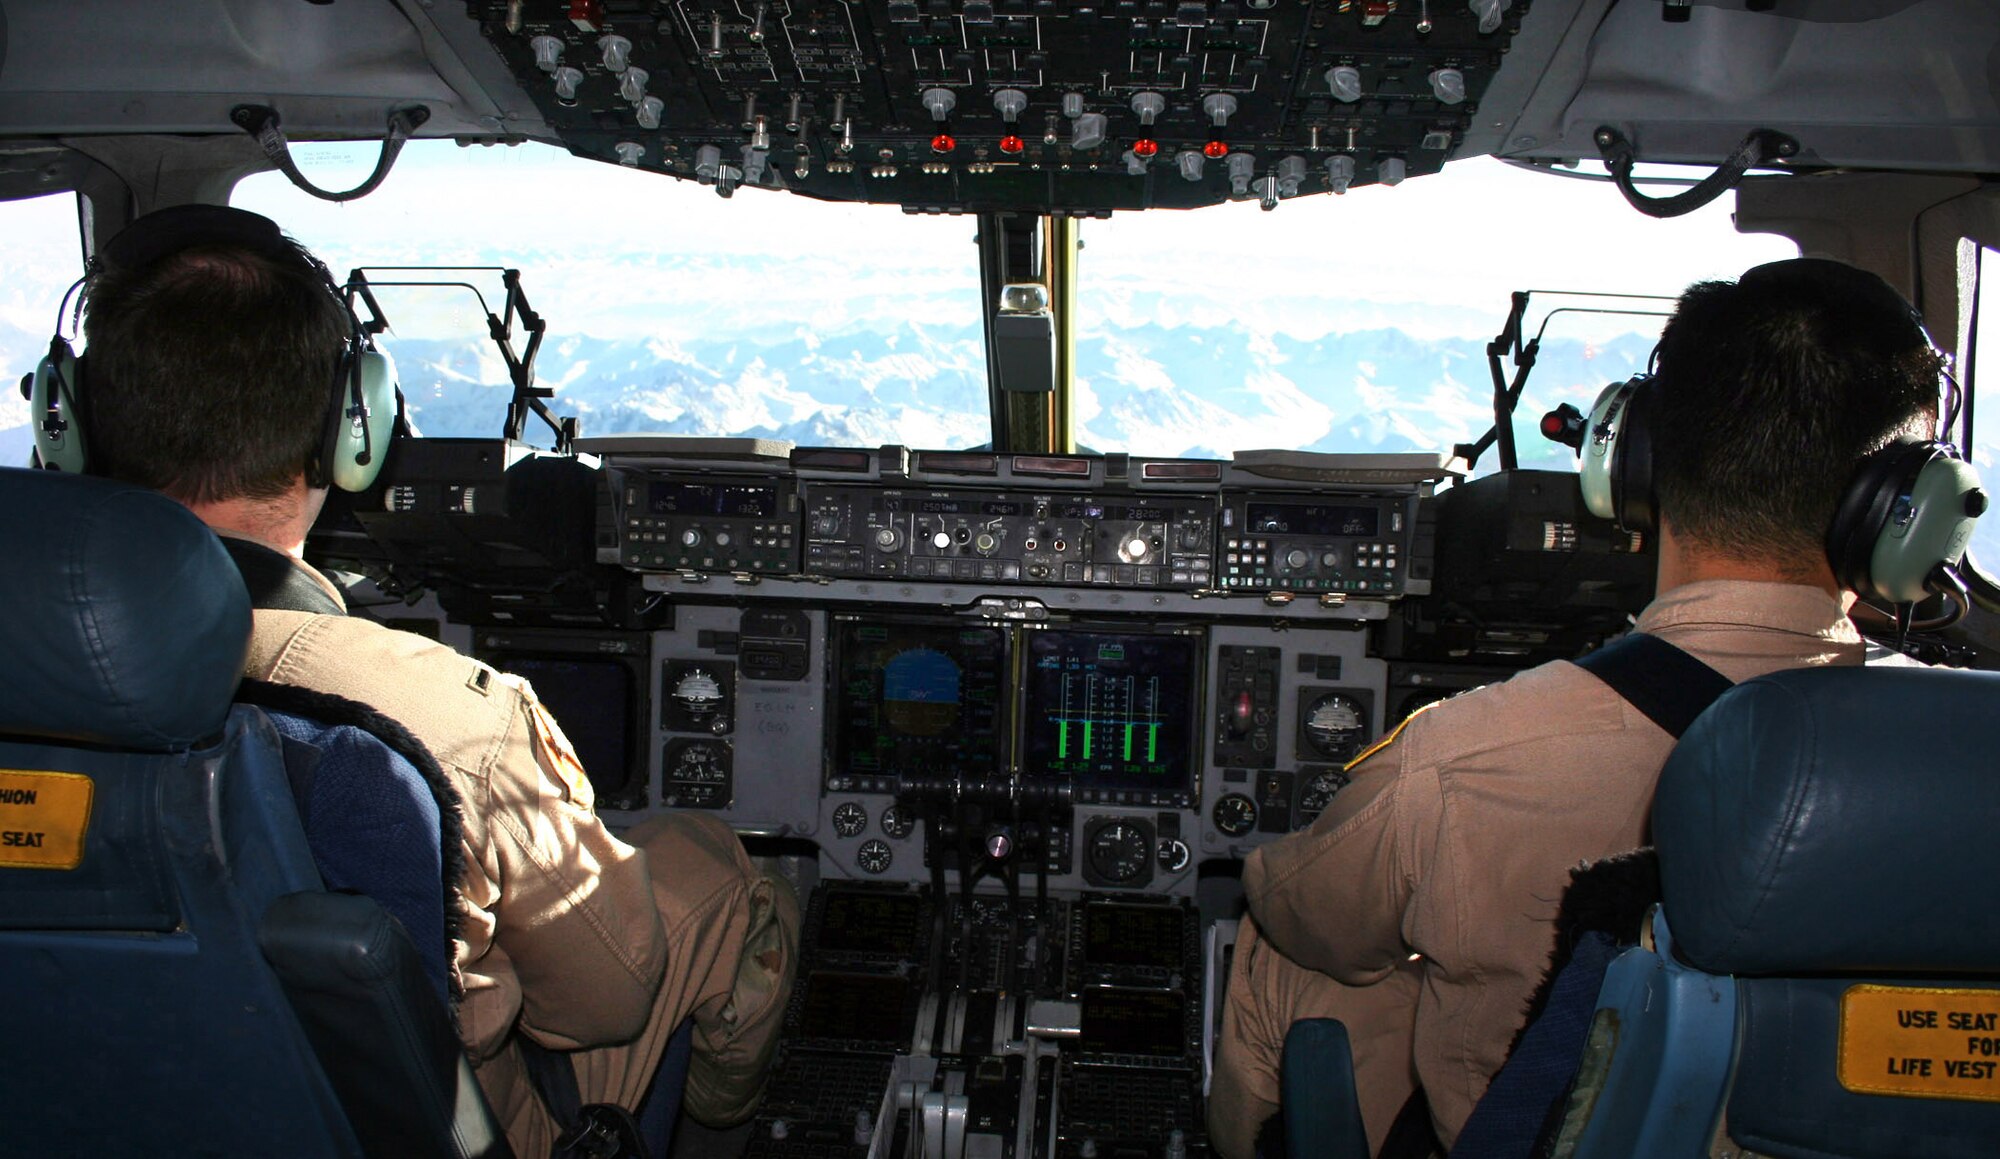 First Lt. Scot Zicarelli and Capt. Sang Kim lift off from Manas Air Base, Kyrgyzstan, in a C-17 Globemaster III over the Tien Shan Mountains with a load of cargo for Bagram Air Base, Afghanistan. Temporarily assigned to the 817th Expeditionary Airlift Squadron, the pilots are deployed from McChord Air Force Base, Wash. (U.S. Air Force photo)